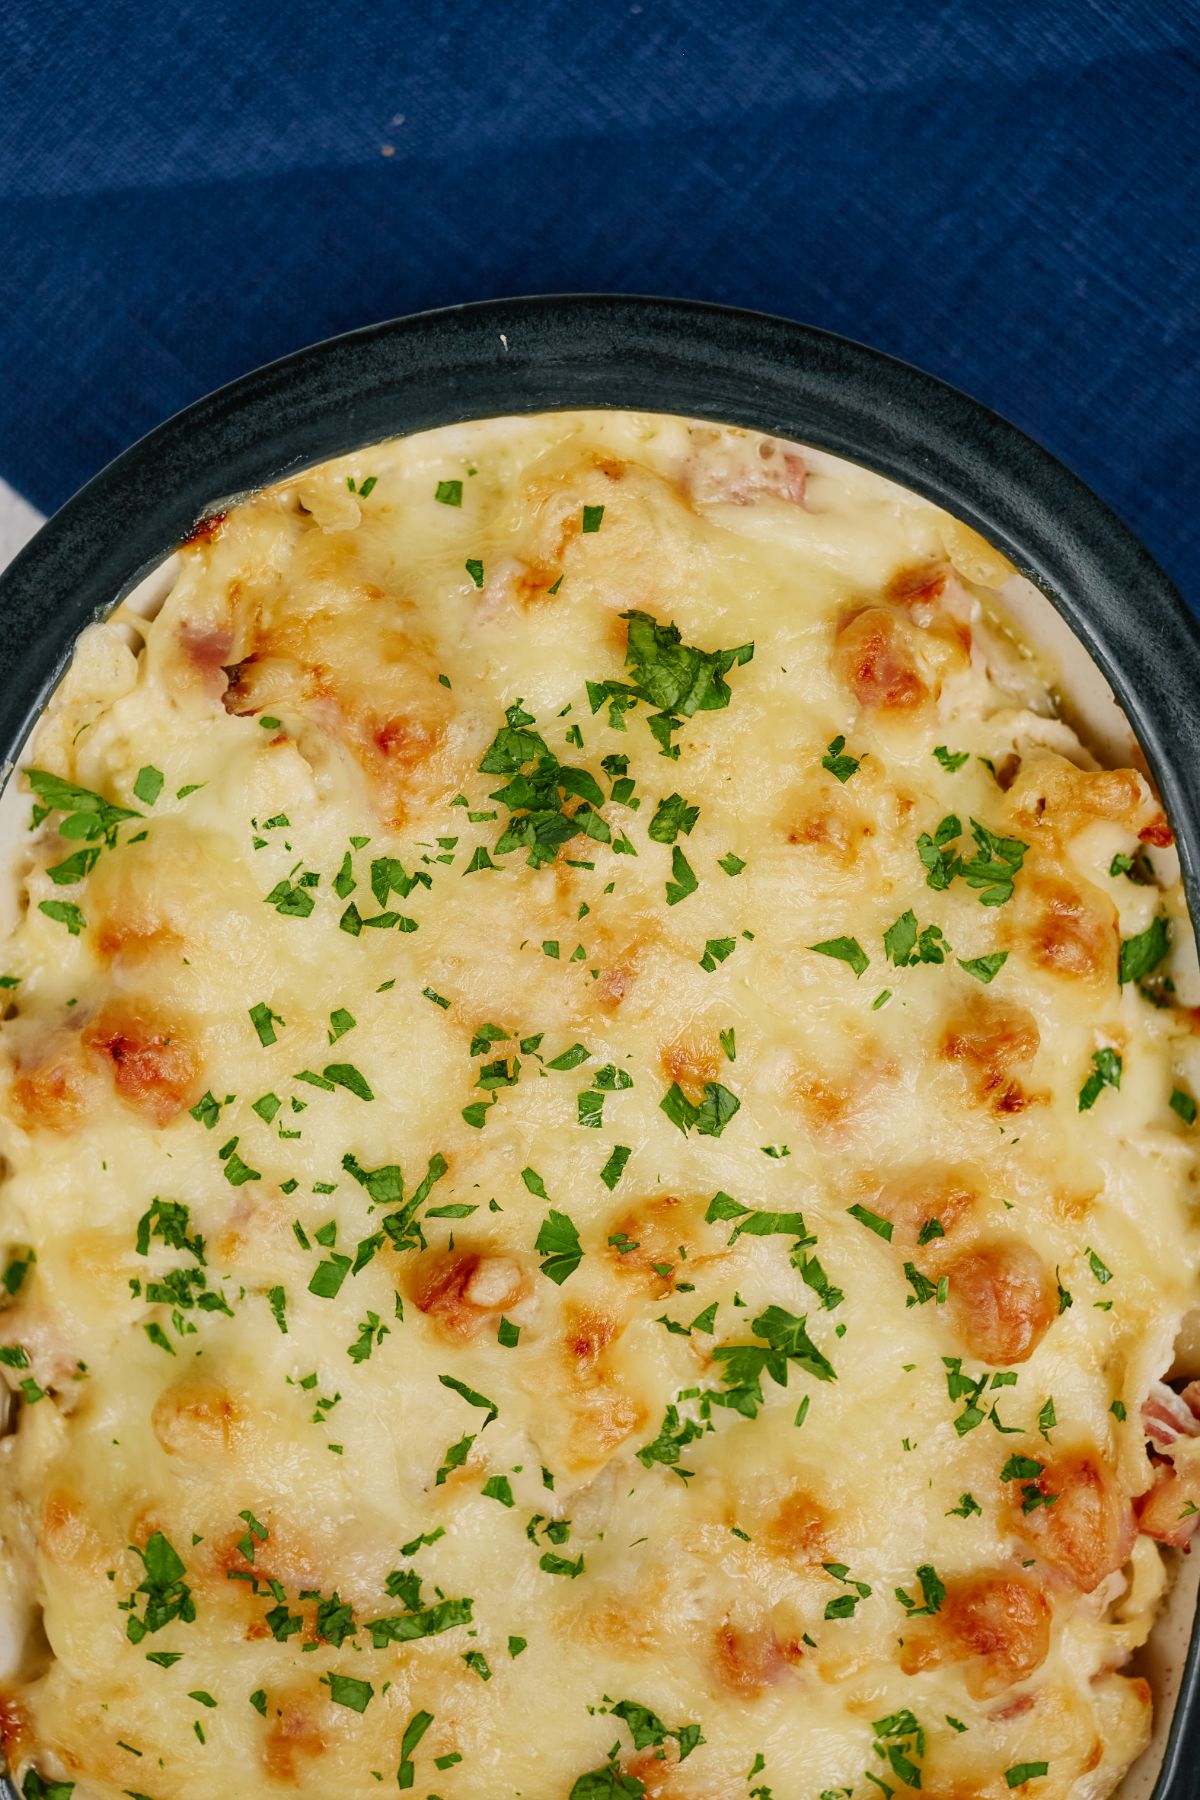 close up image of top of casserole showing browned cheese and parsley